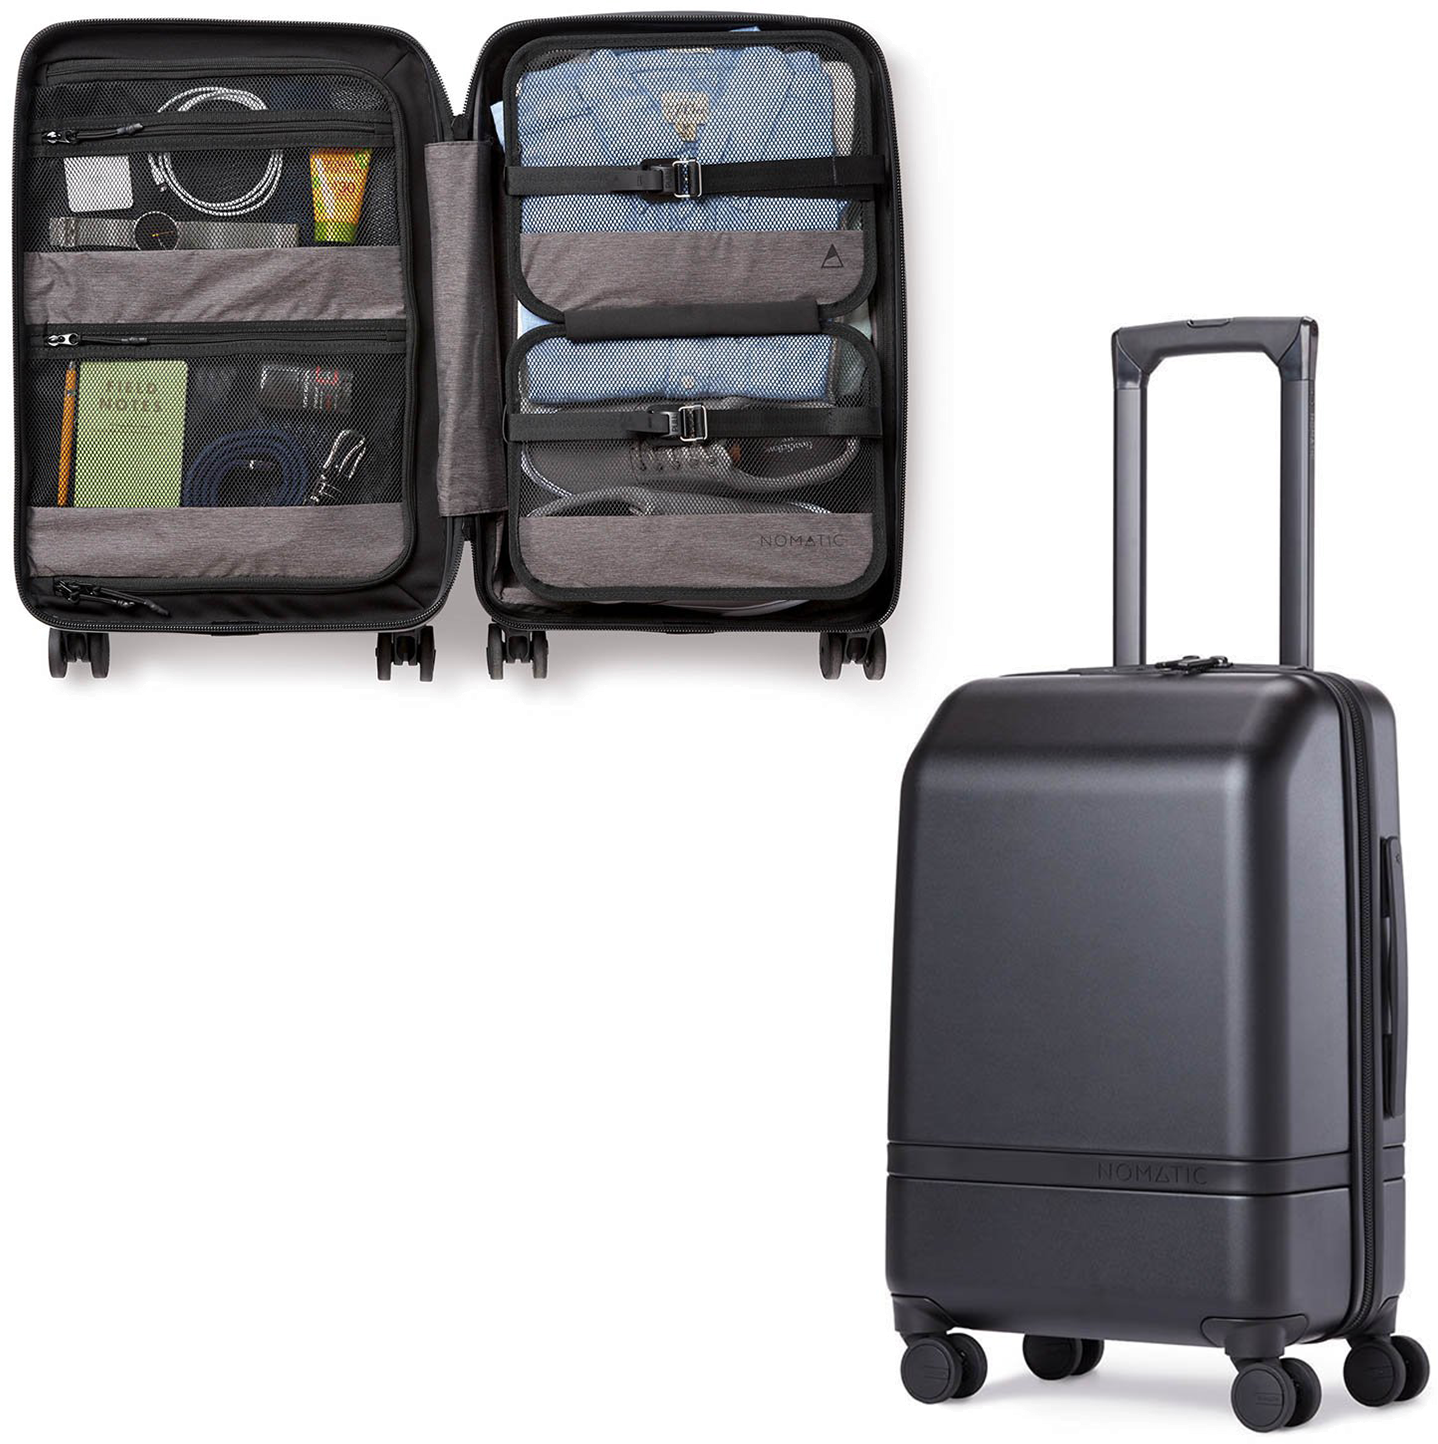 Nomatic Carry-On Classic - Black